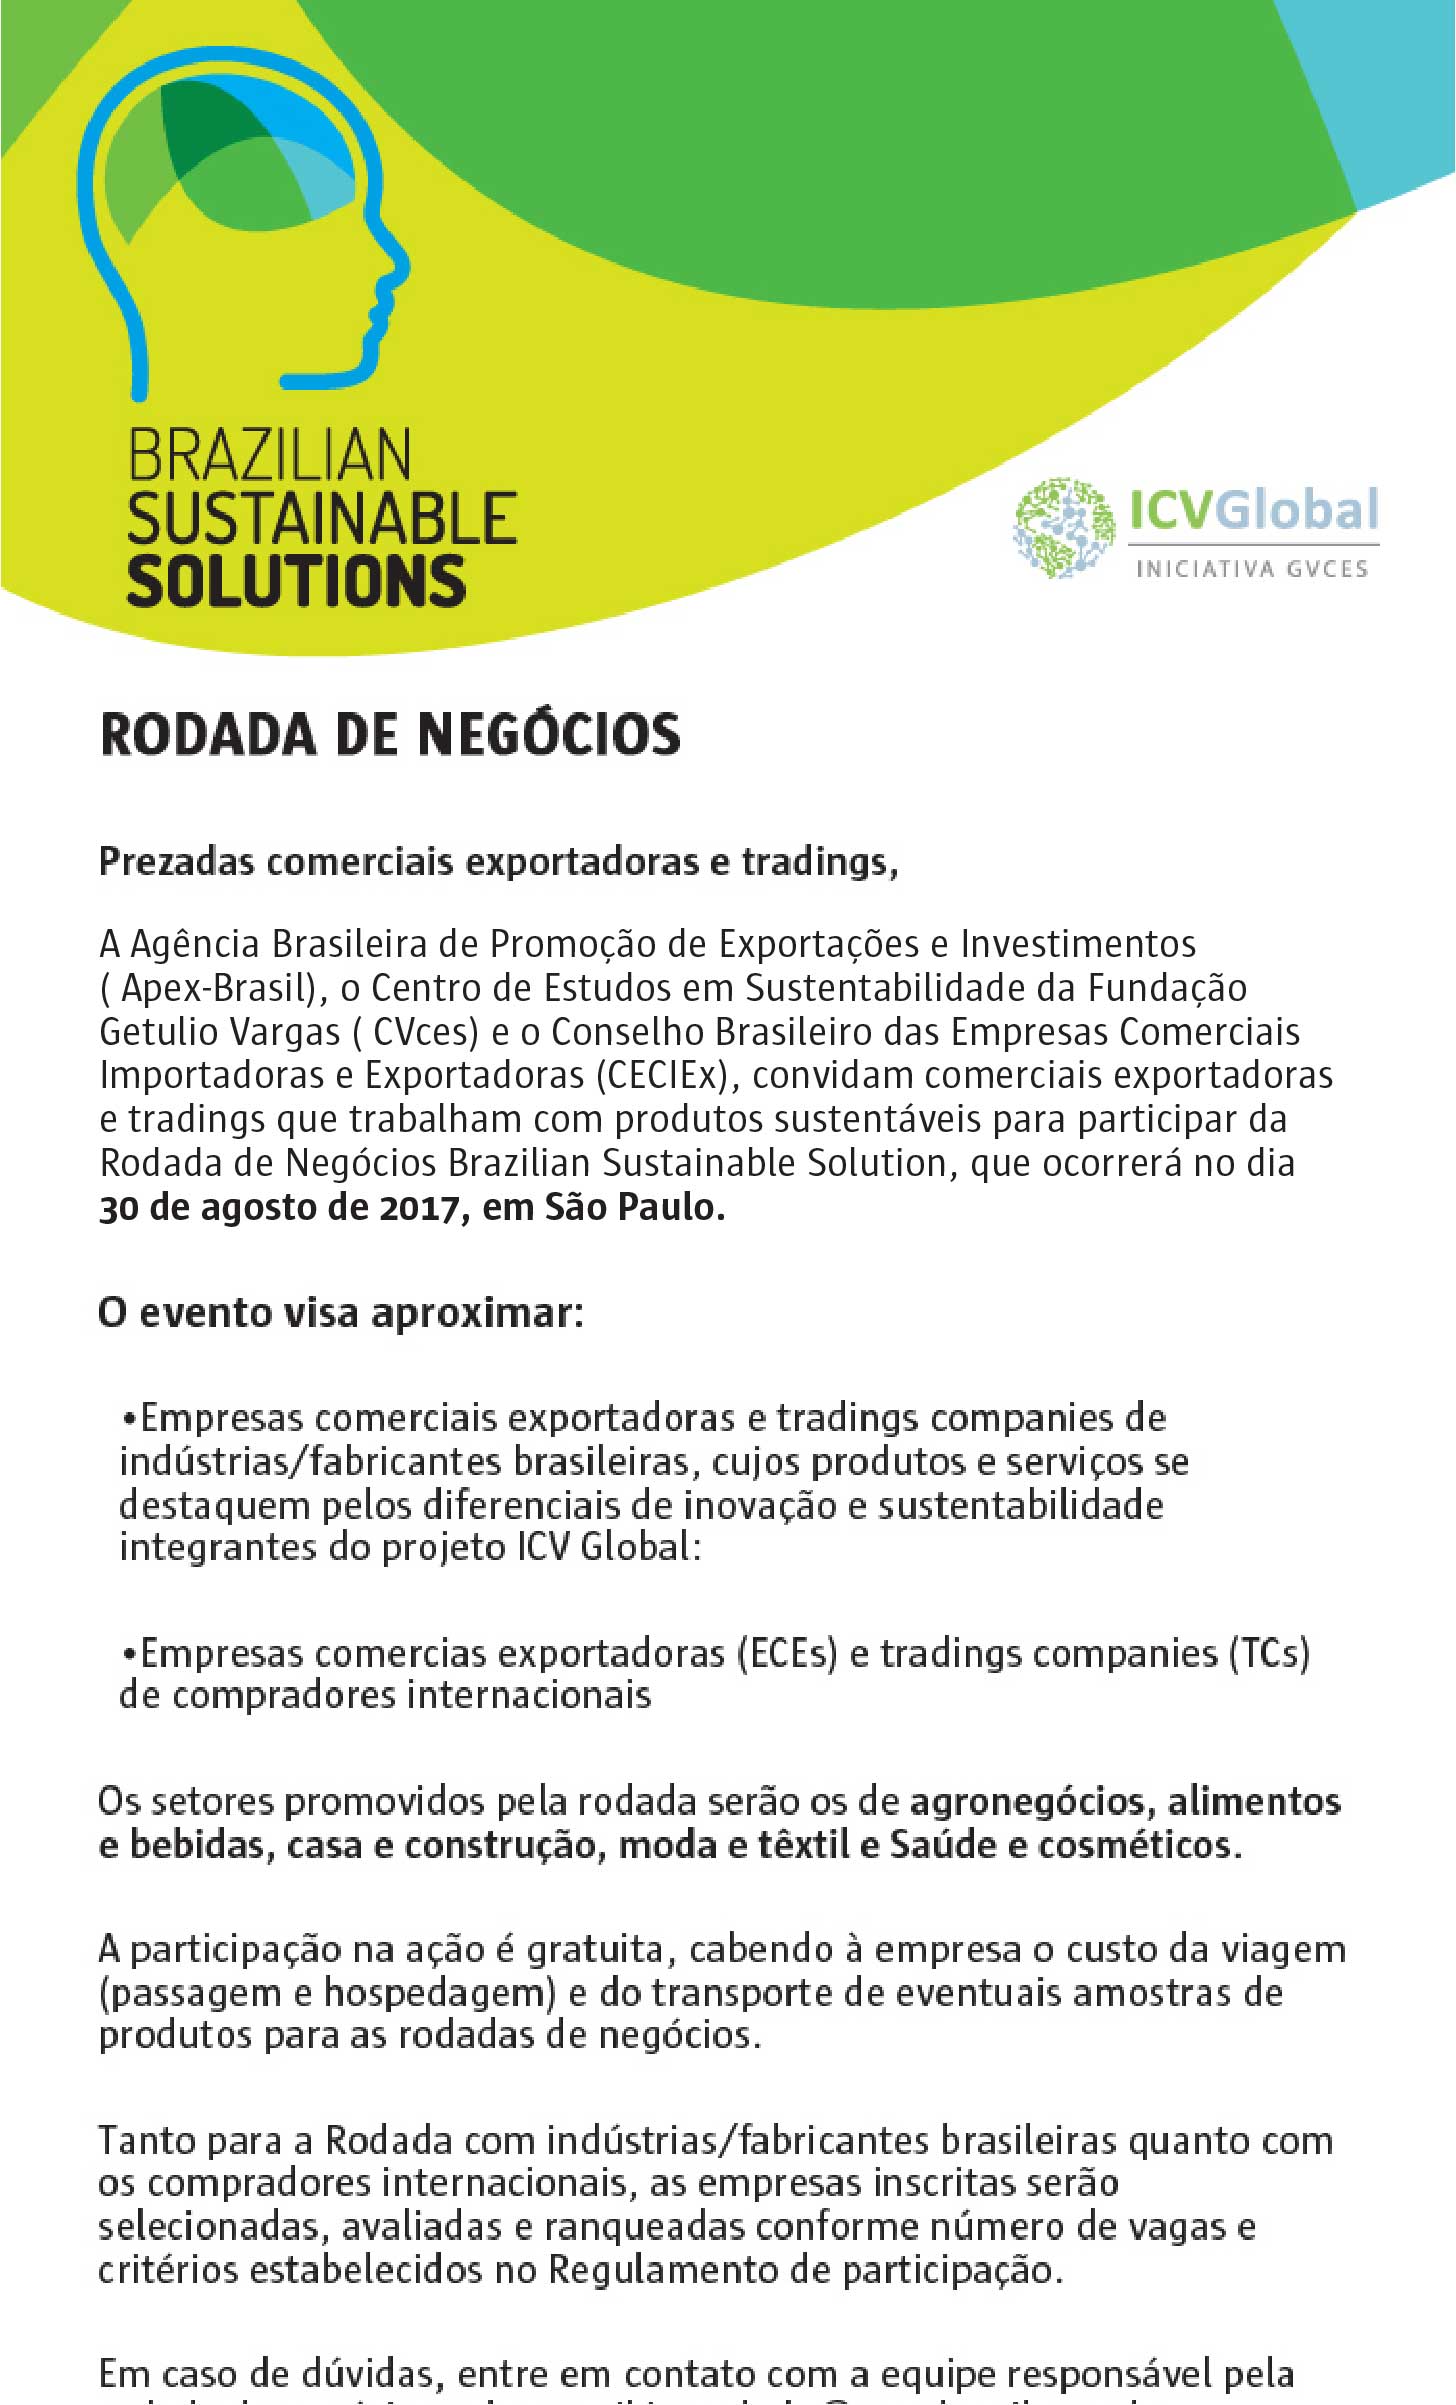 http://www.apexbrasil.com.br/emails/Brazilian-Sustanable-Solutions/2017/04/index_r1_c1.jpg